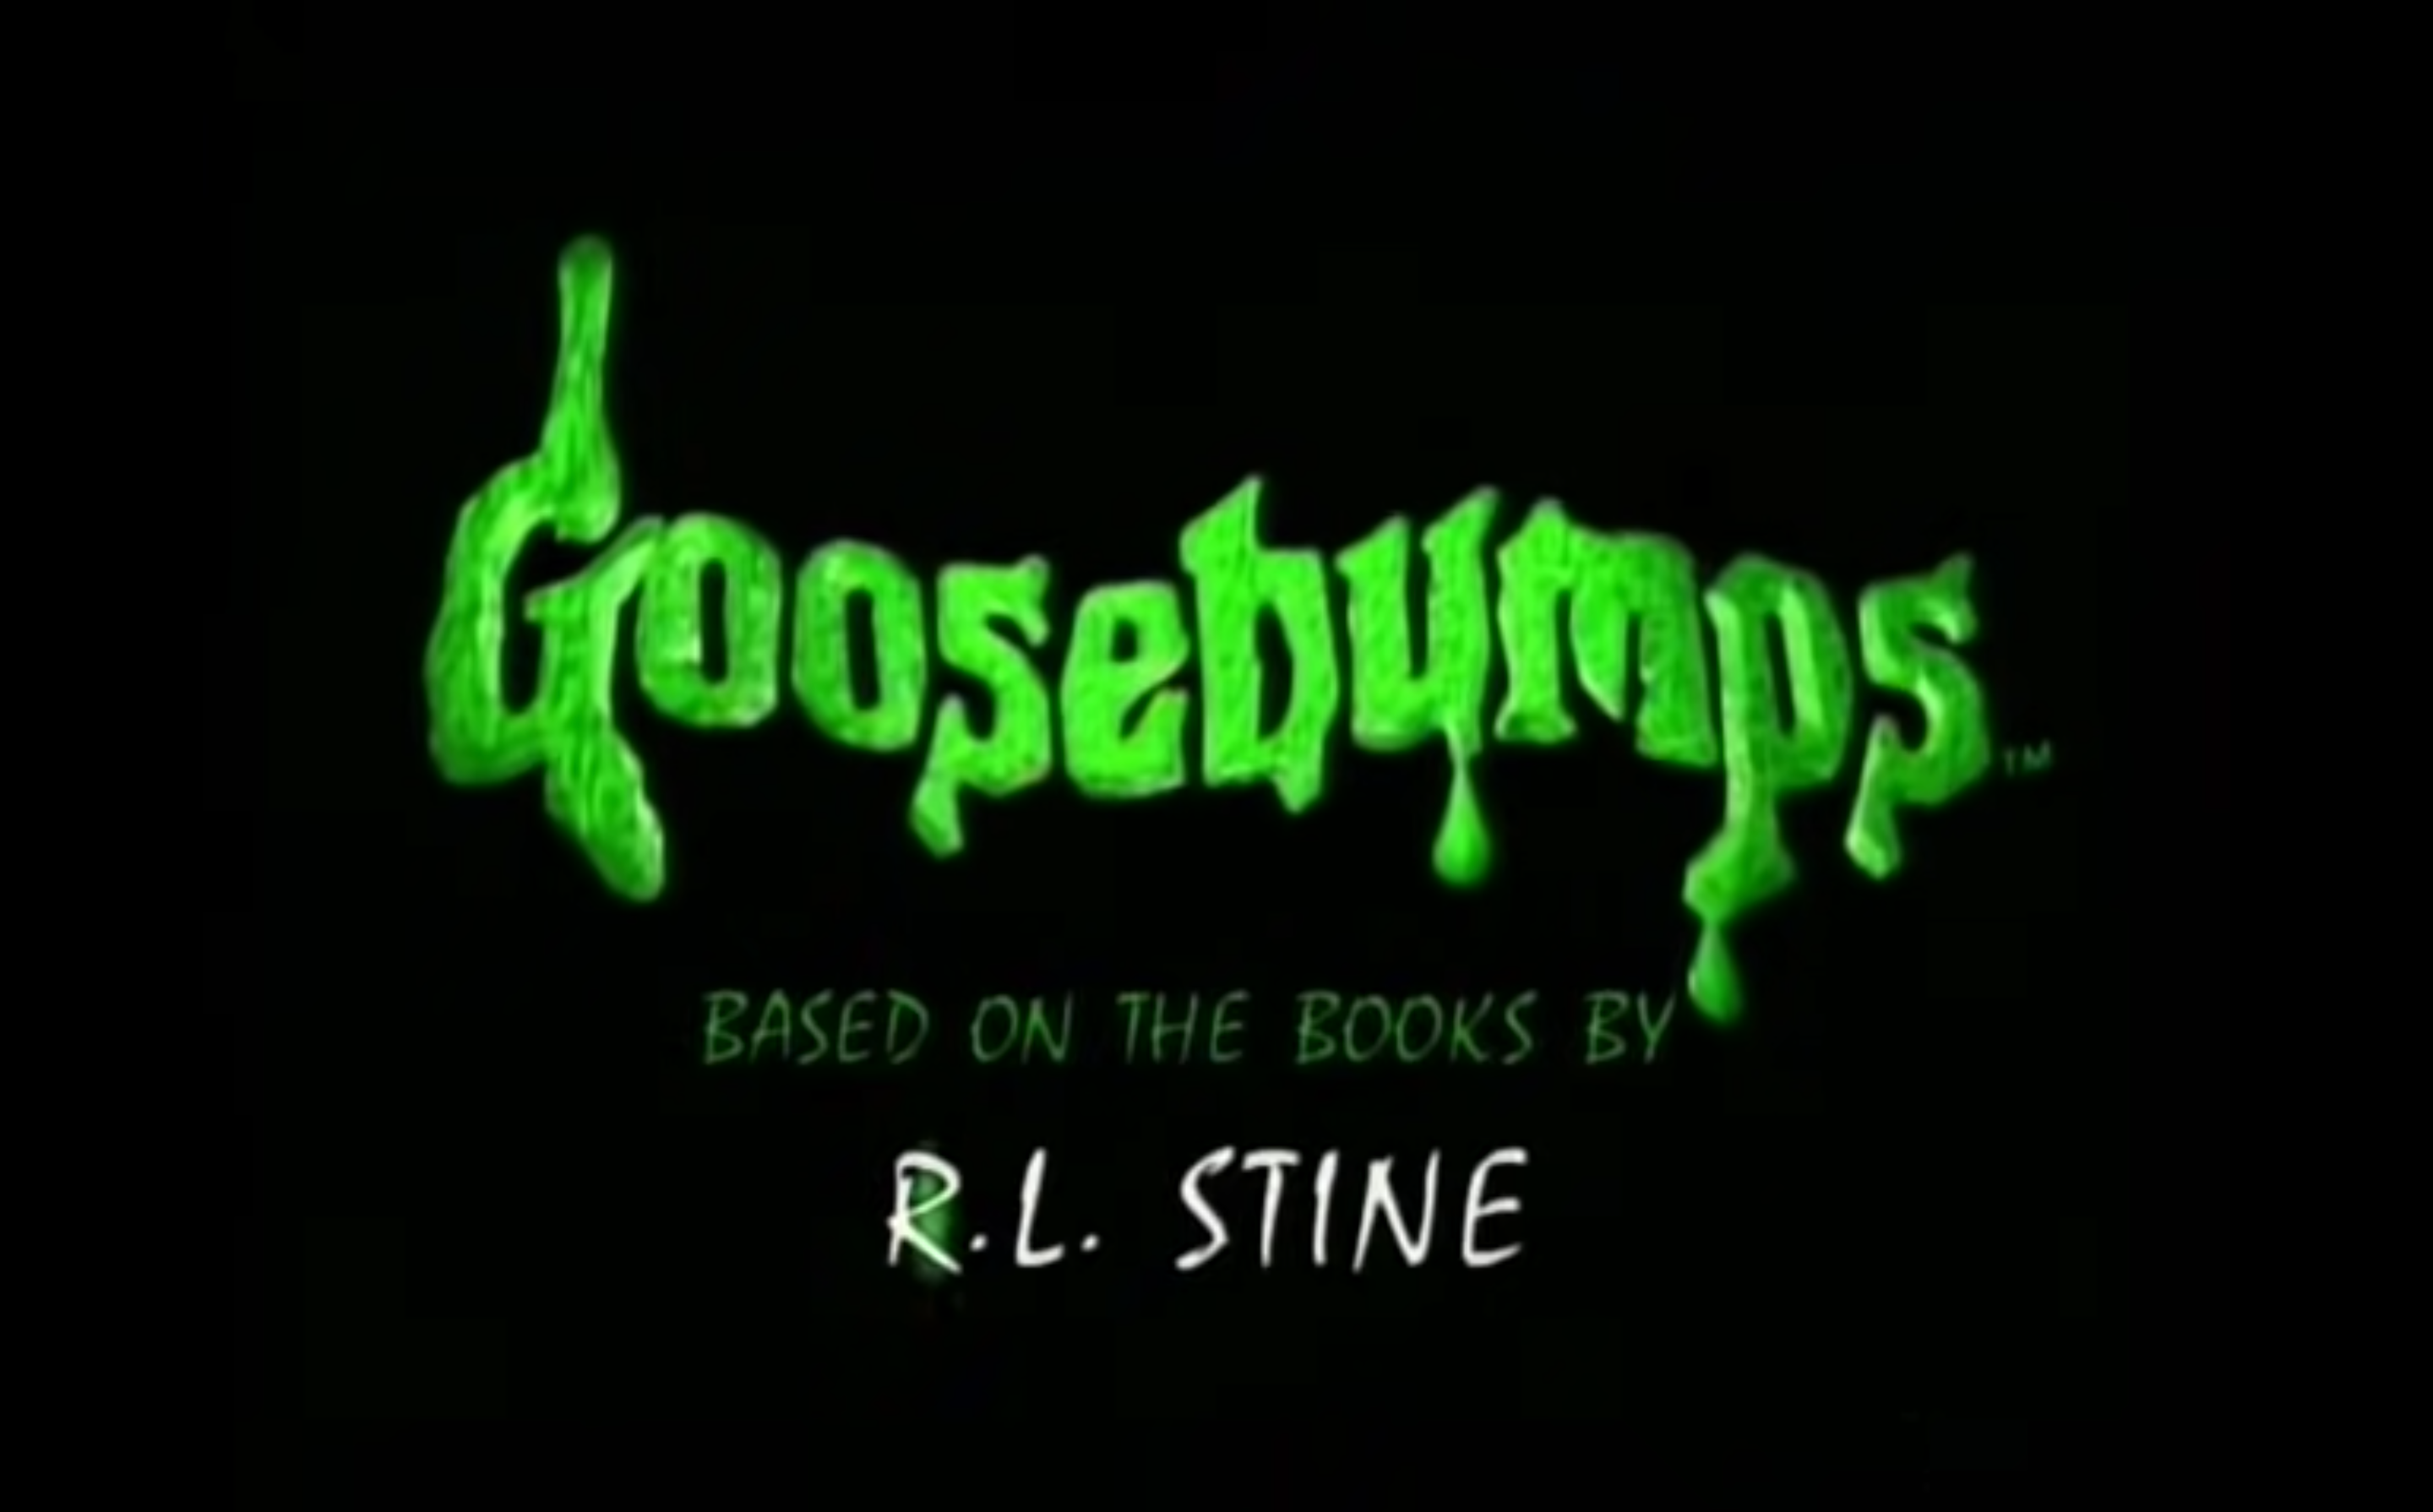 New Goosebumps series set to creep out Disney Plus subscribers